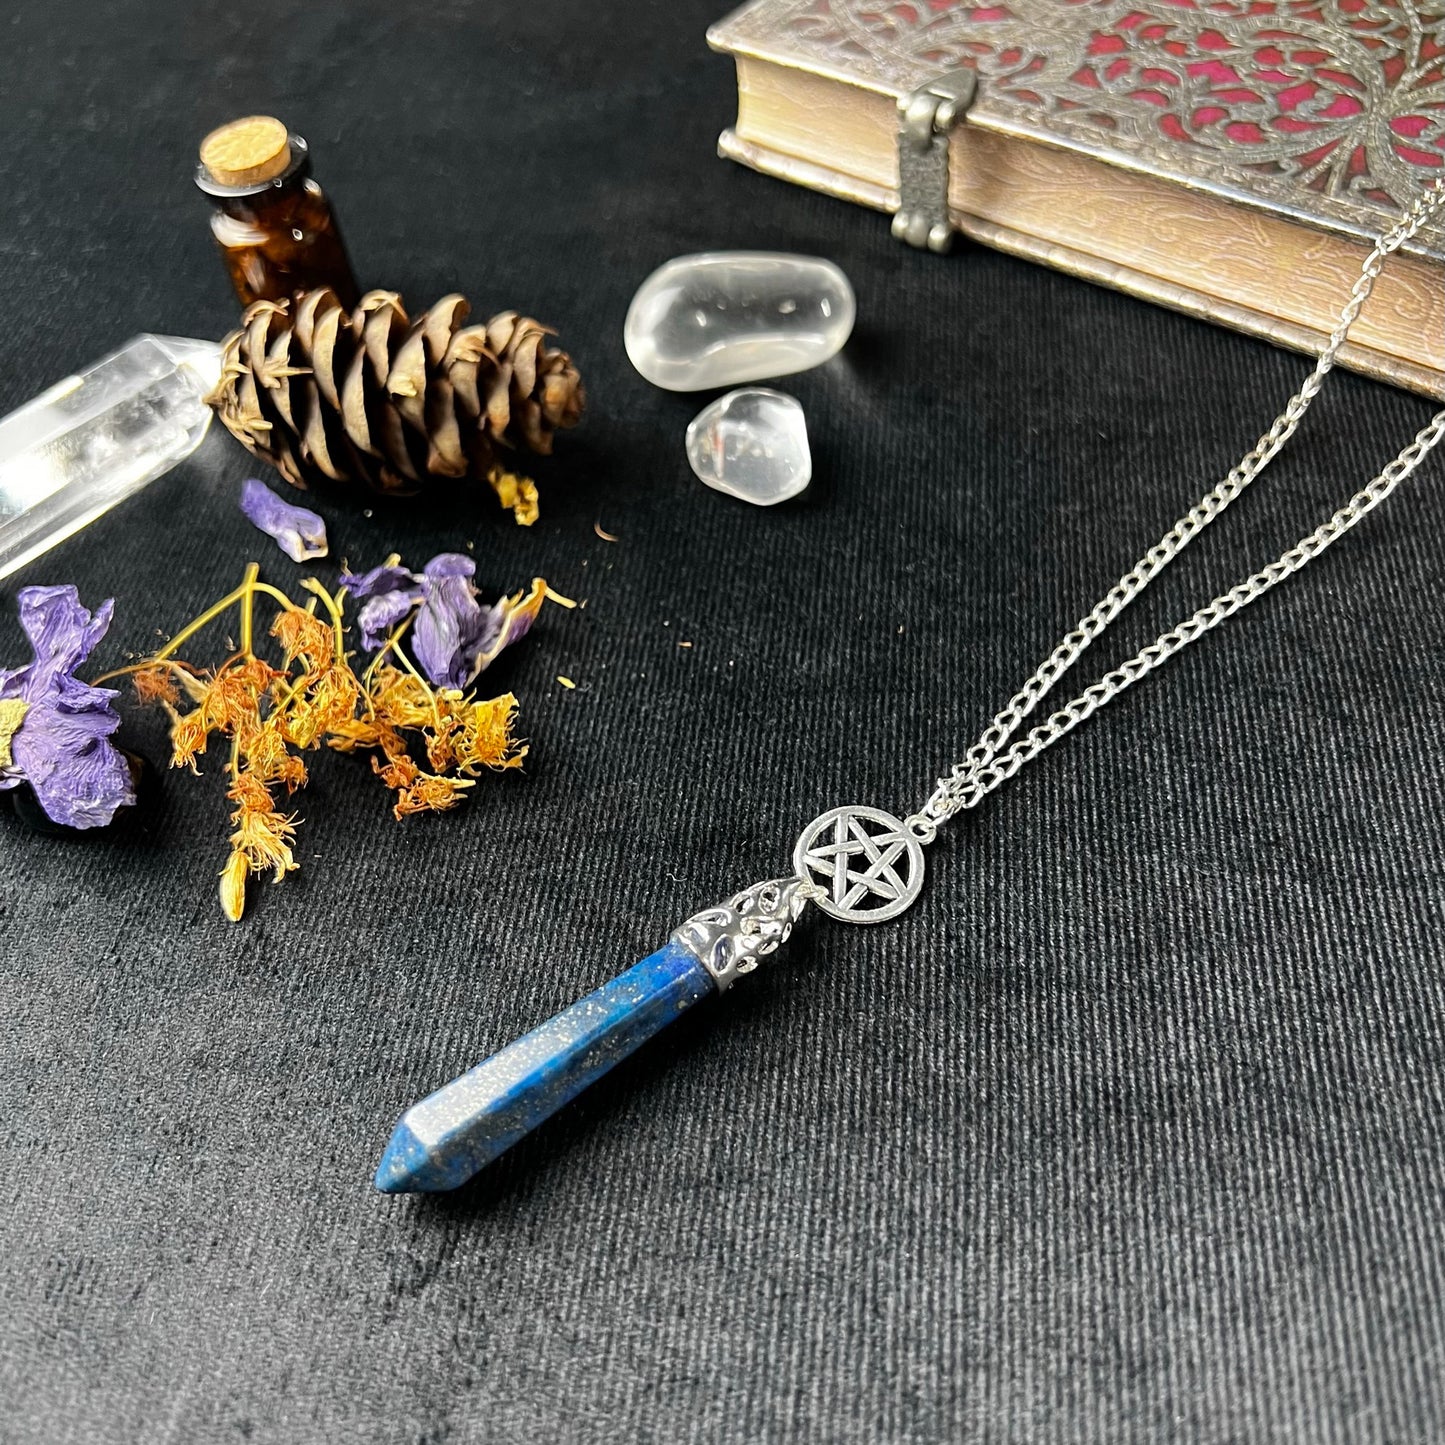 Lapis lazuli and pentacle pendulum necklace - The French Witch shop